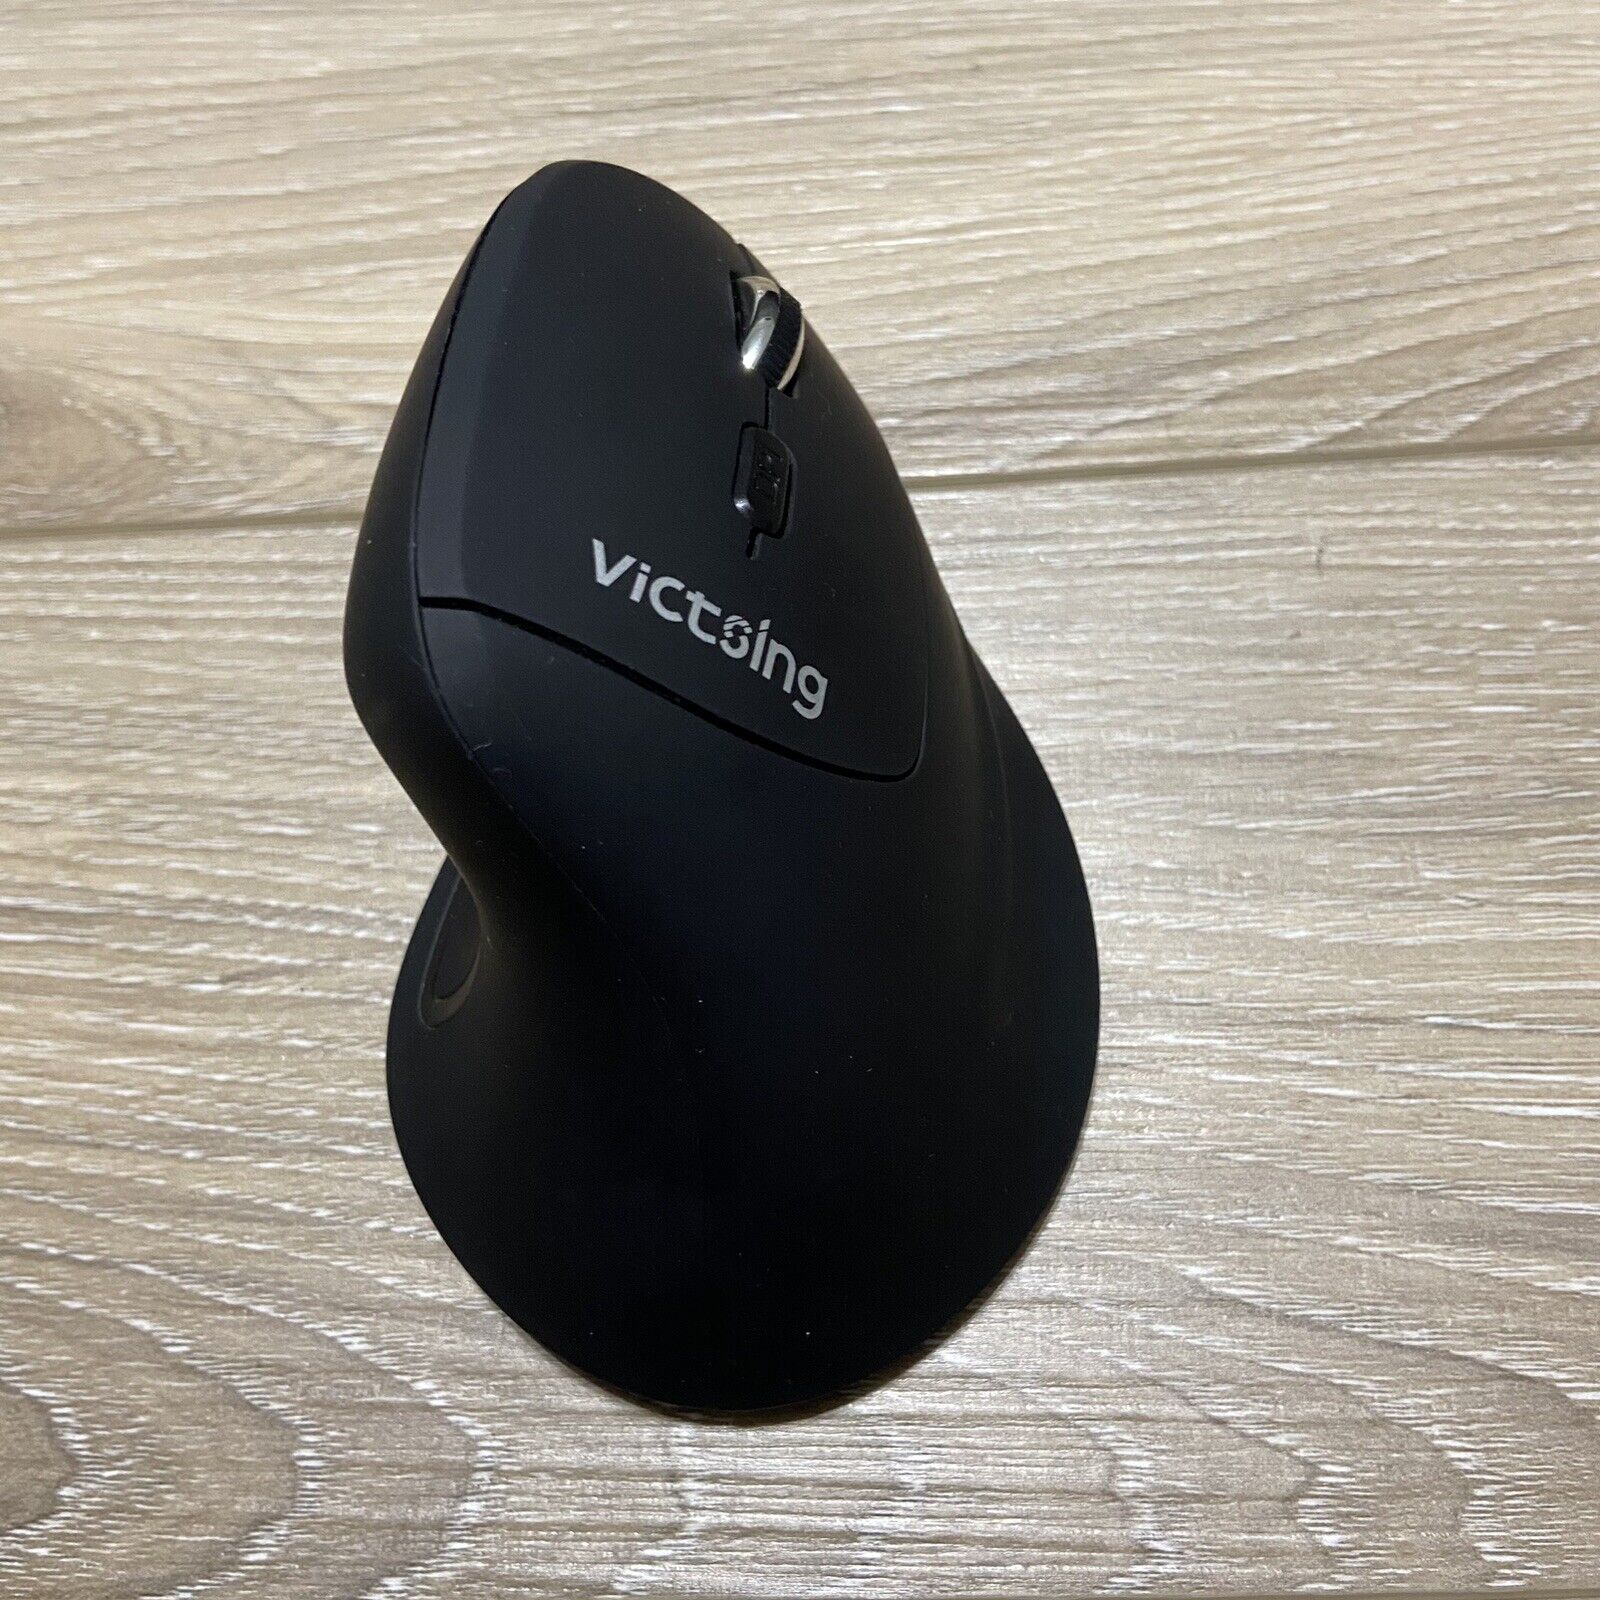 Victsing Vertical Wireless Mouse PC134B Black With USB Dongle 2.4GHz